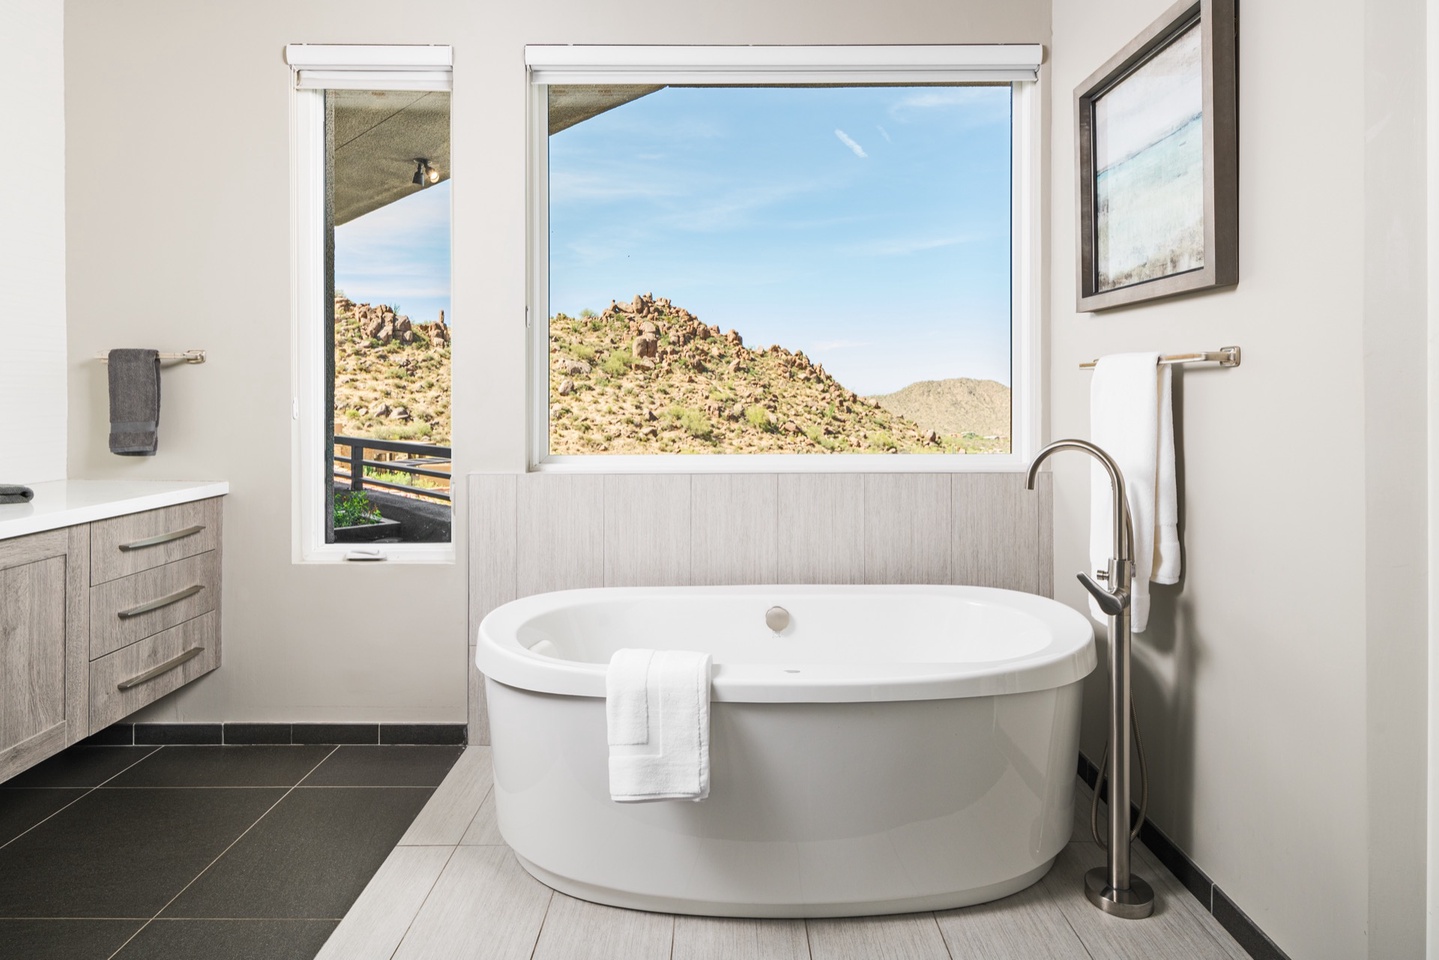 Draw a calming bath overlooking in the Valley of the Sun